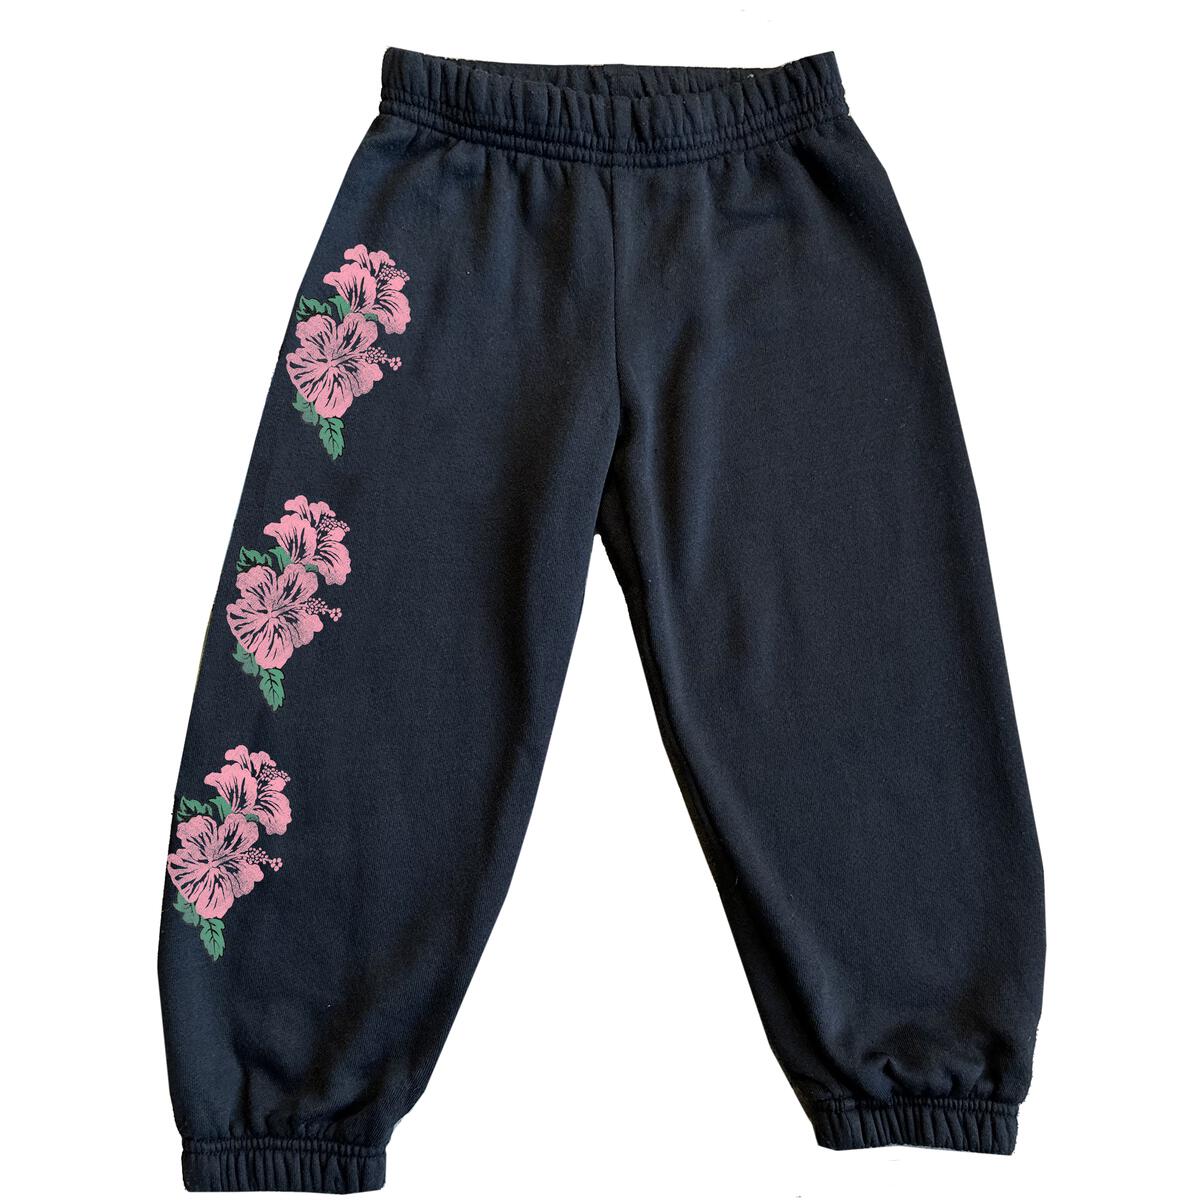 ROWDY SPROUT HAWAII SWEATPANT - BLACK